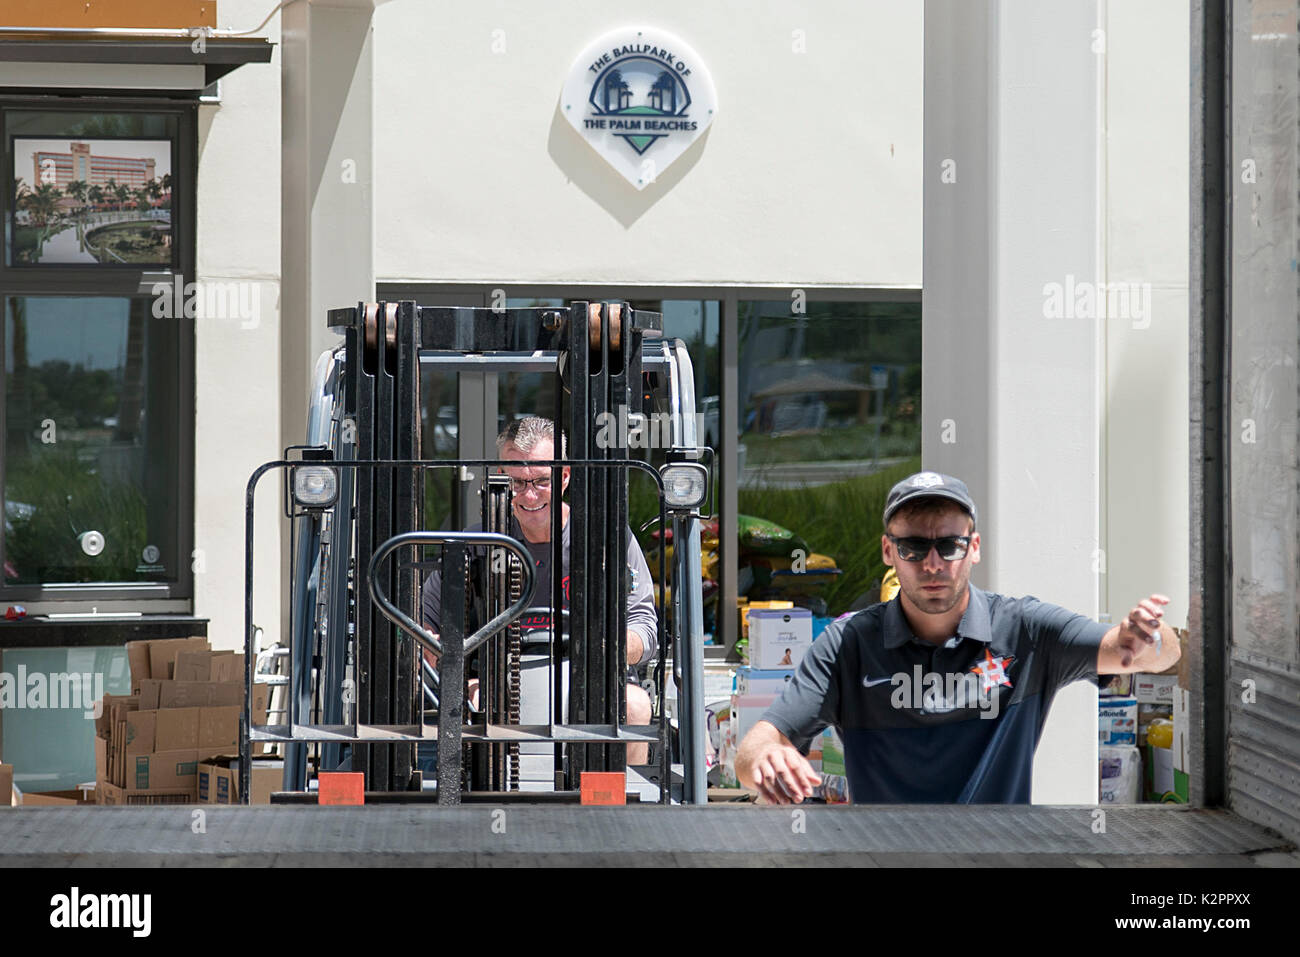 West Palm Beach, Florida, USA. 31st Aug, 2017. Ballpark Director of Operations Thomas Bell, left, operates a forklift as Greg Sargent, 27, climbs into one of the 53-foot-long trailers that will carry supplies for Houston parked at the Ballpark of the Palm Beaches in West Palm Beach, Fla., on Thursday, August 31, 2017. The Houston Astros baseball team is praising Palm Beach County residents for a greater-than-expected response to the team's request for donations to help victims of Hurricane Harvey. The unexpected response has prompted the team to send in a second truck to carry supplies t Stock Photo